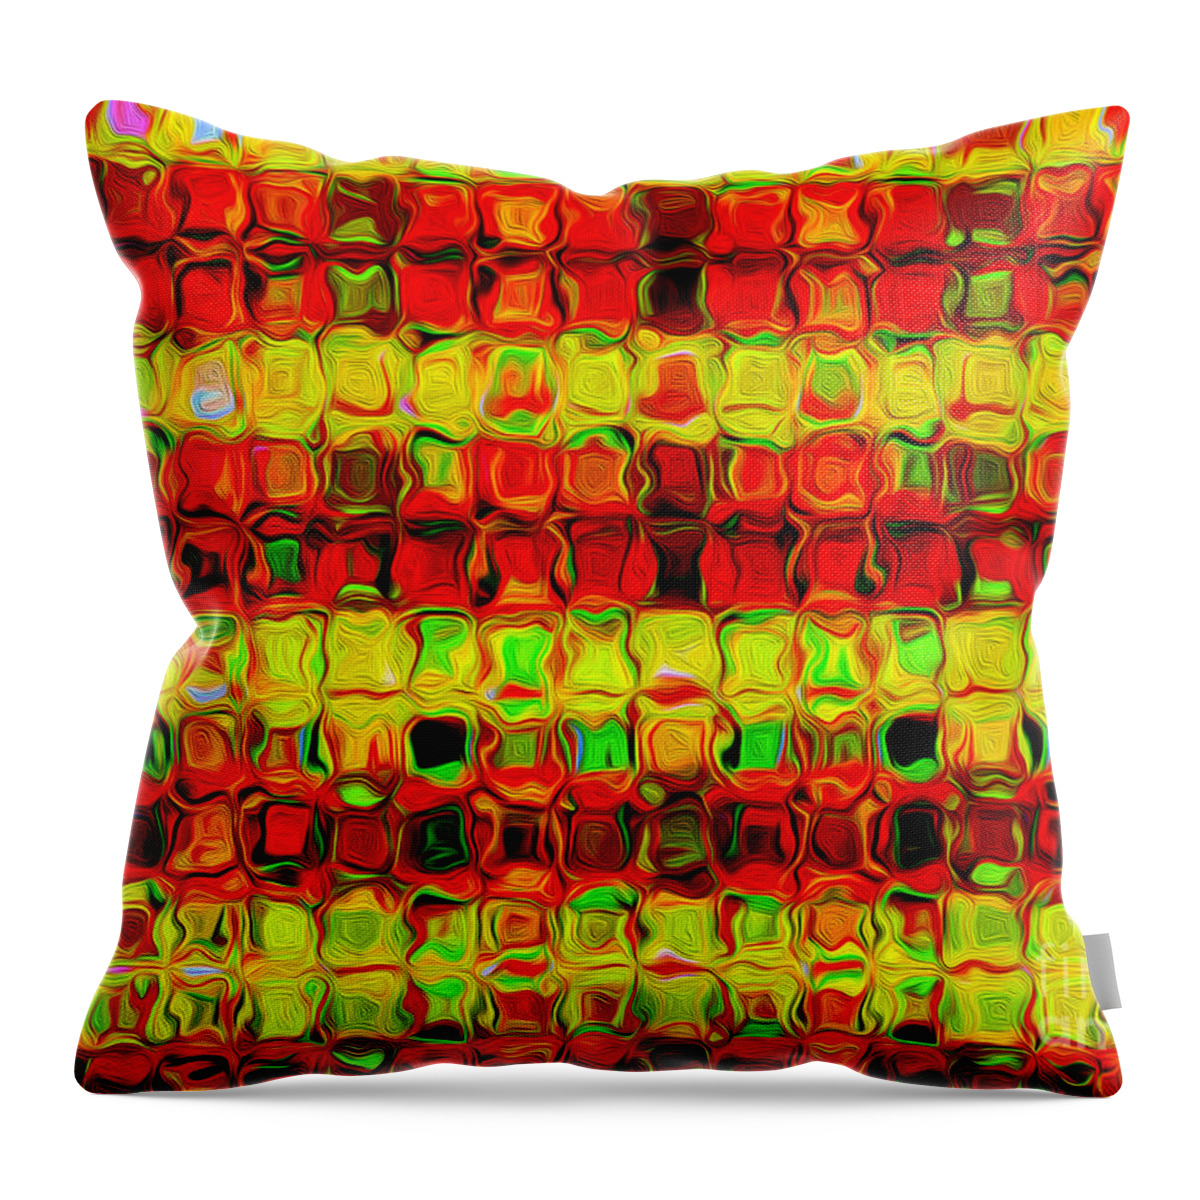 Photography Throw Pillow featuring the photograph Mosaic Abstract - Red Yellow by Kaye Menner by Kaye Menner